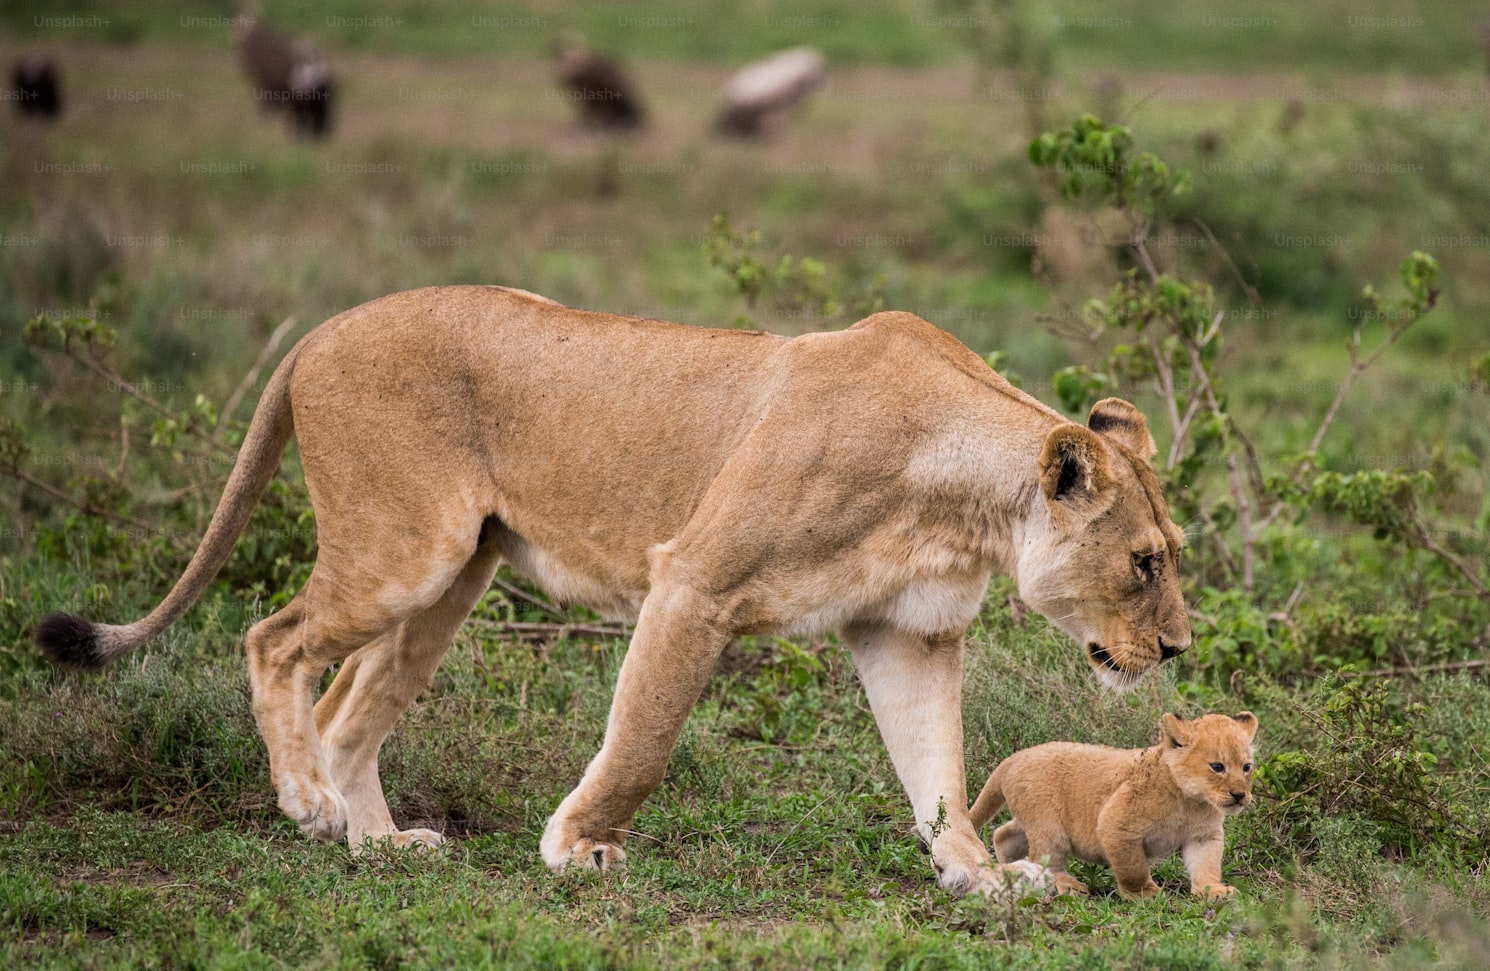 Lioness with cubs in the Serengeti National Park. Africa